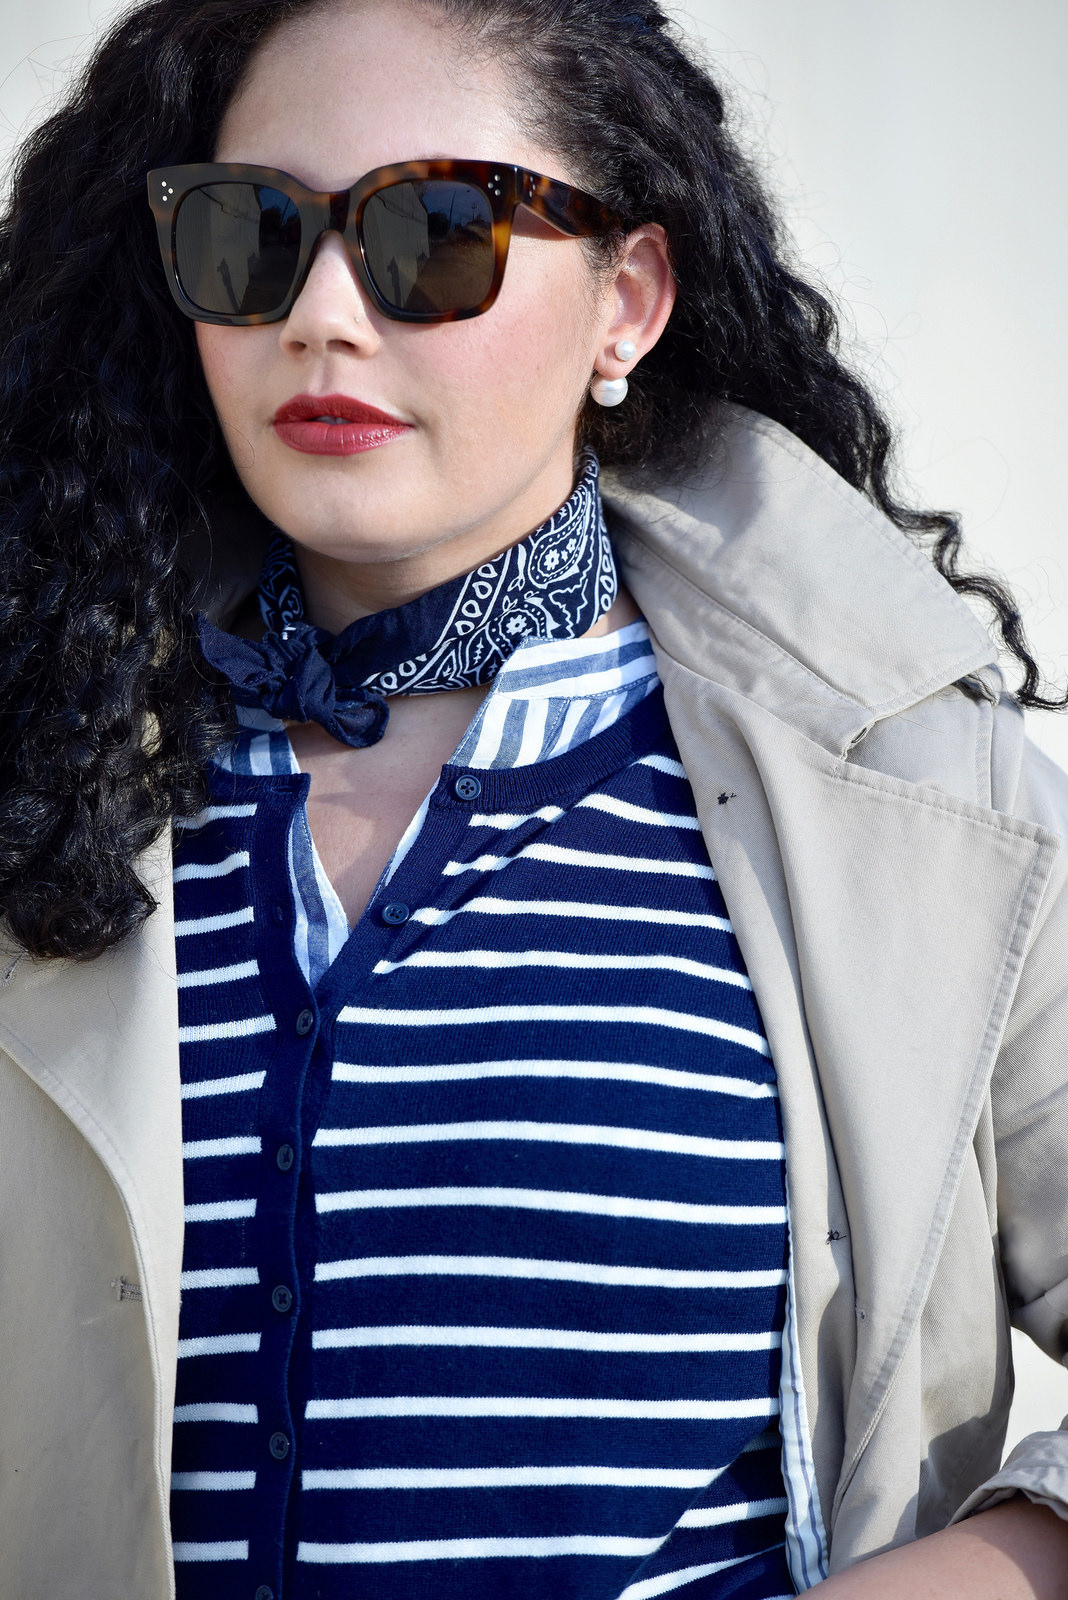 A Fresh take on the Nautical Trend for Spring